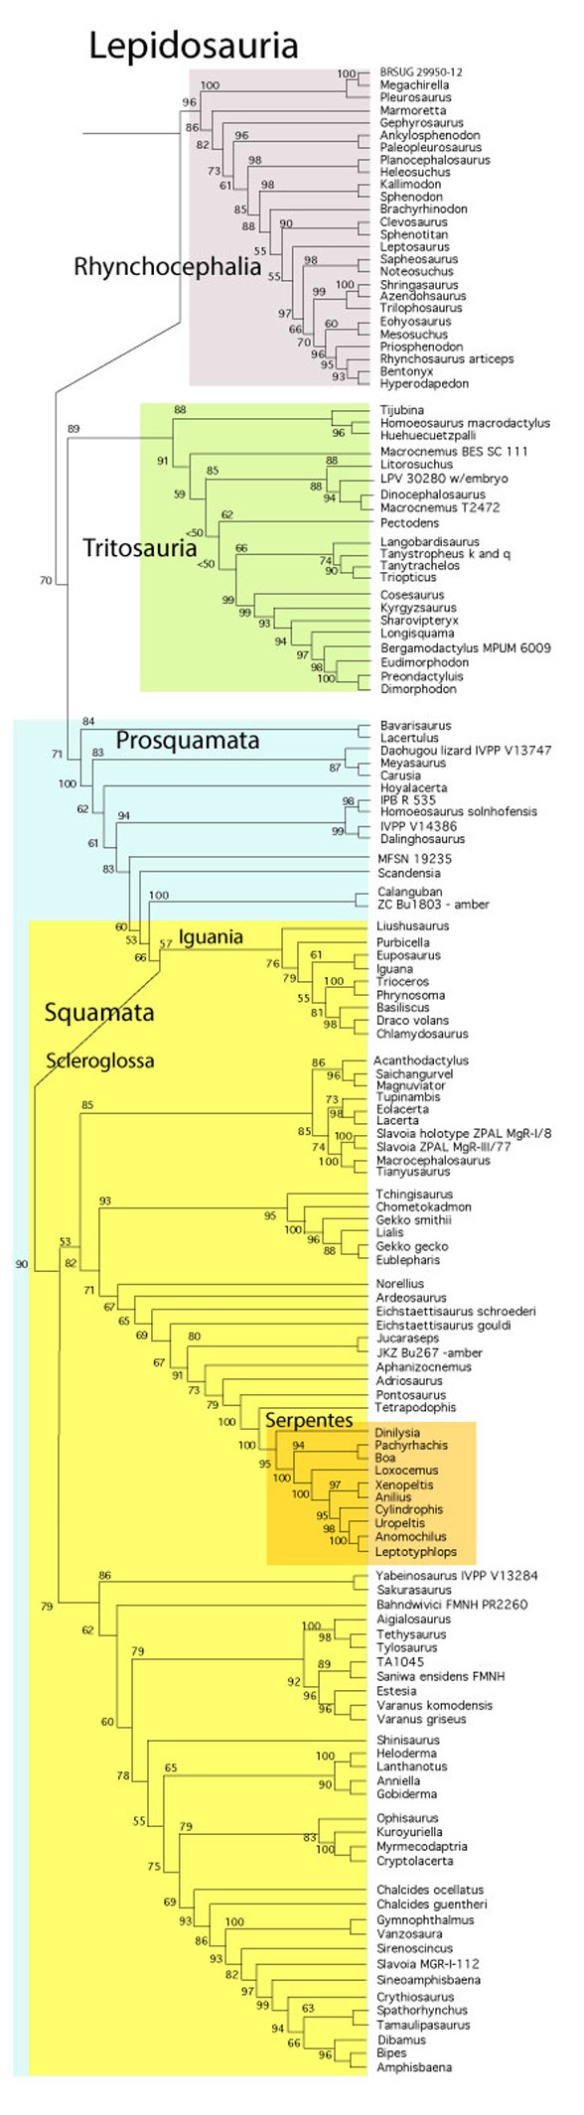 Figure 2. Subset of the large reptile tree focusing on lepidosaurs and snakes are among the squamates.